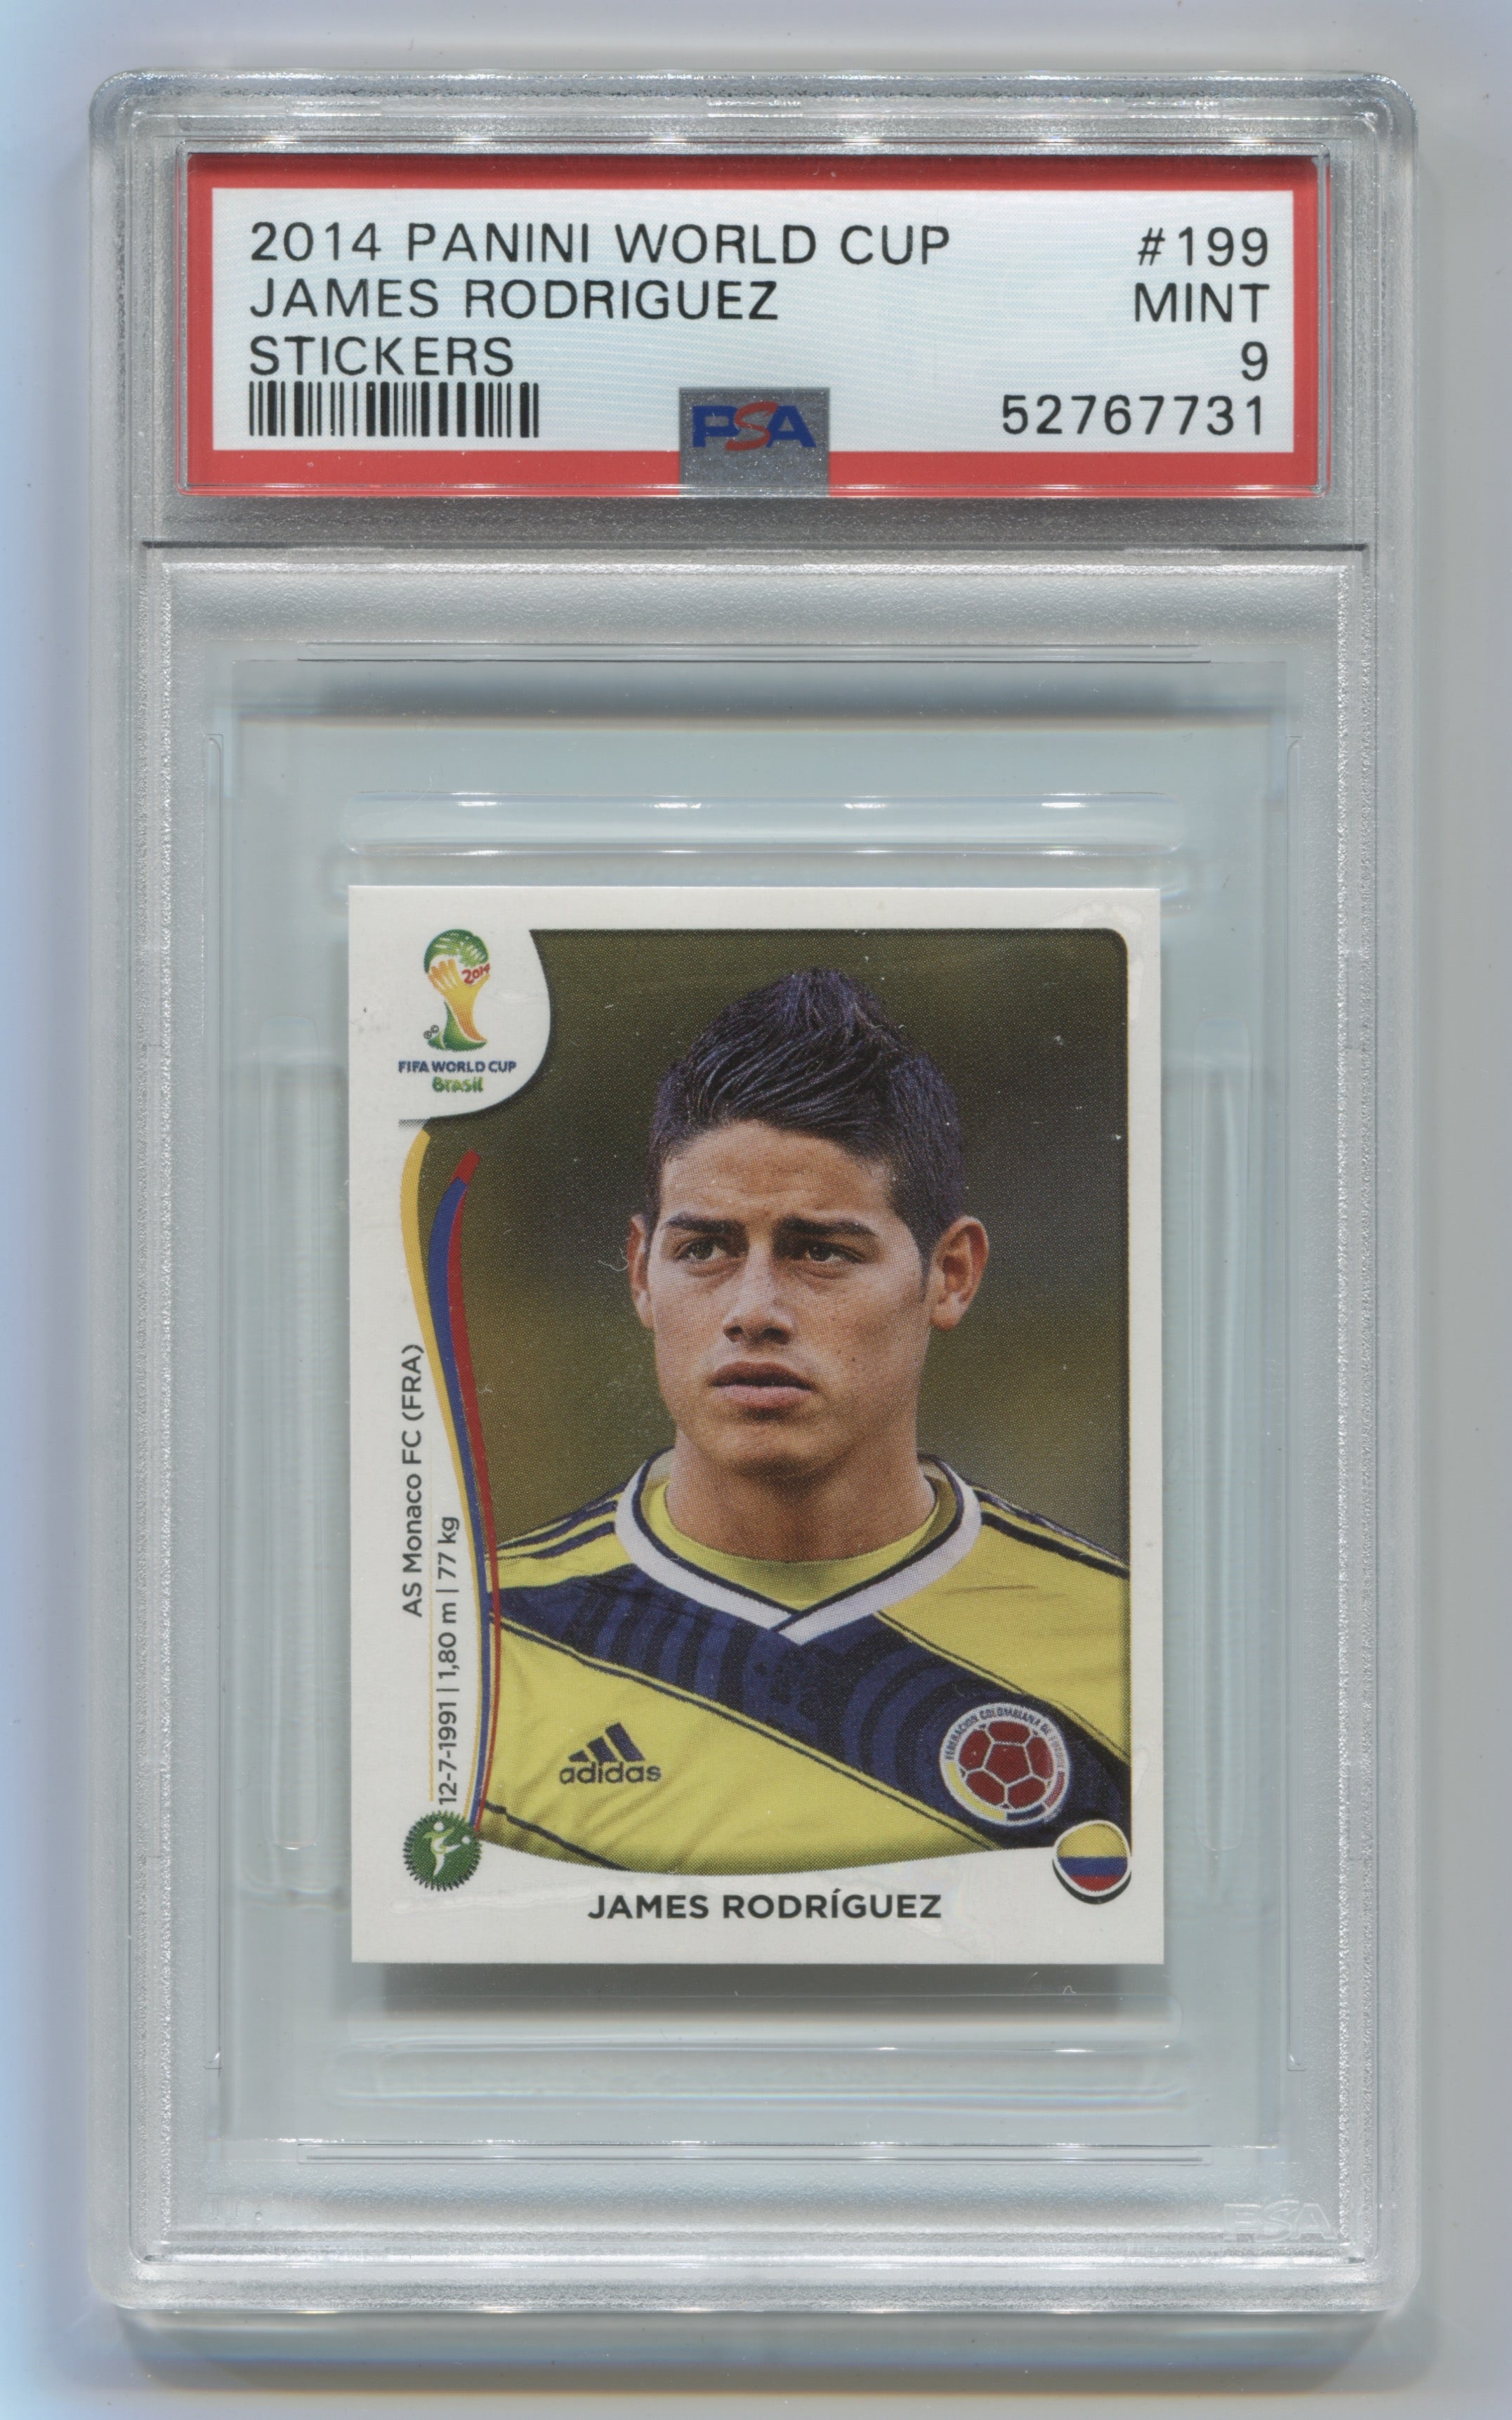 2014 Panini World Cup Stickers #199 James Rodriguez PSA 9 | Eastridge Sports Cards